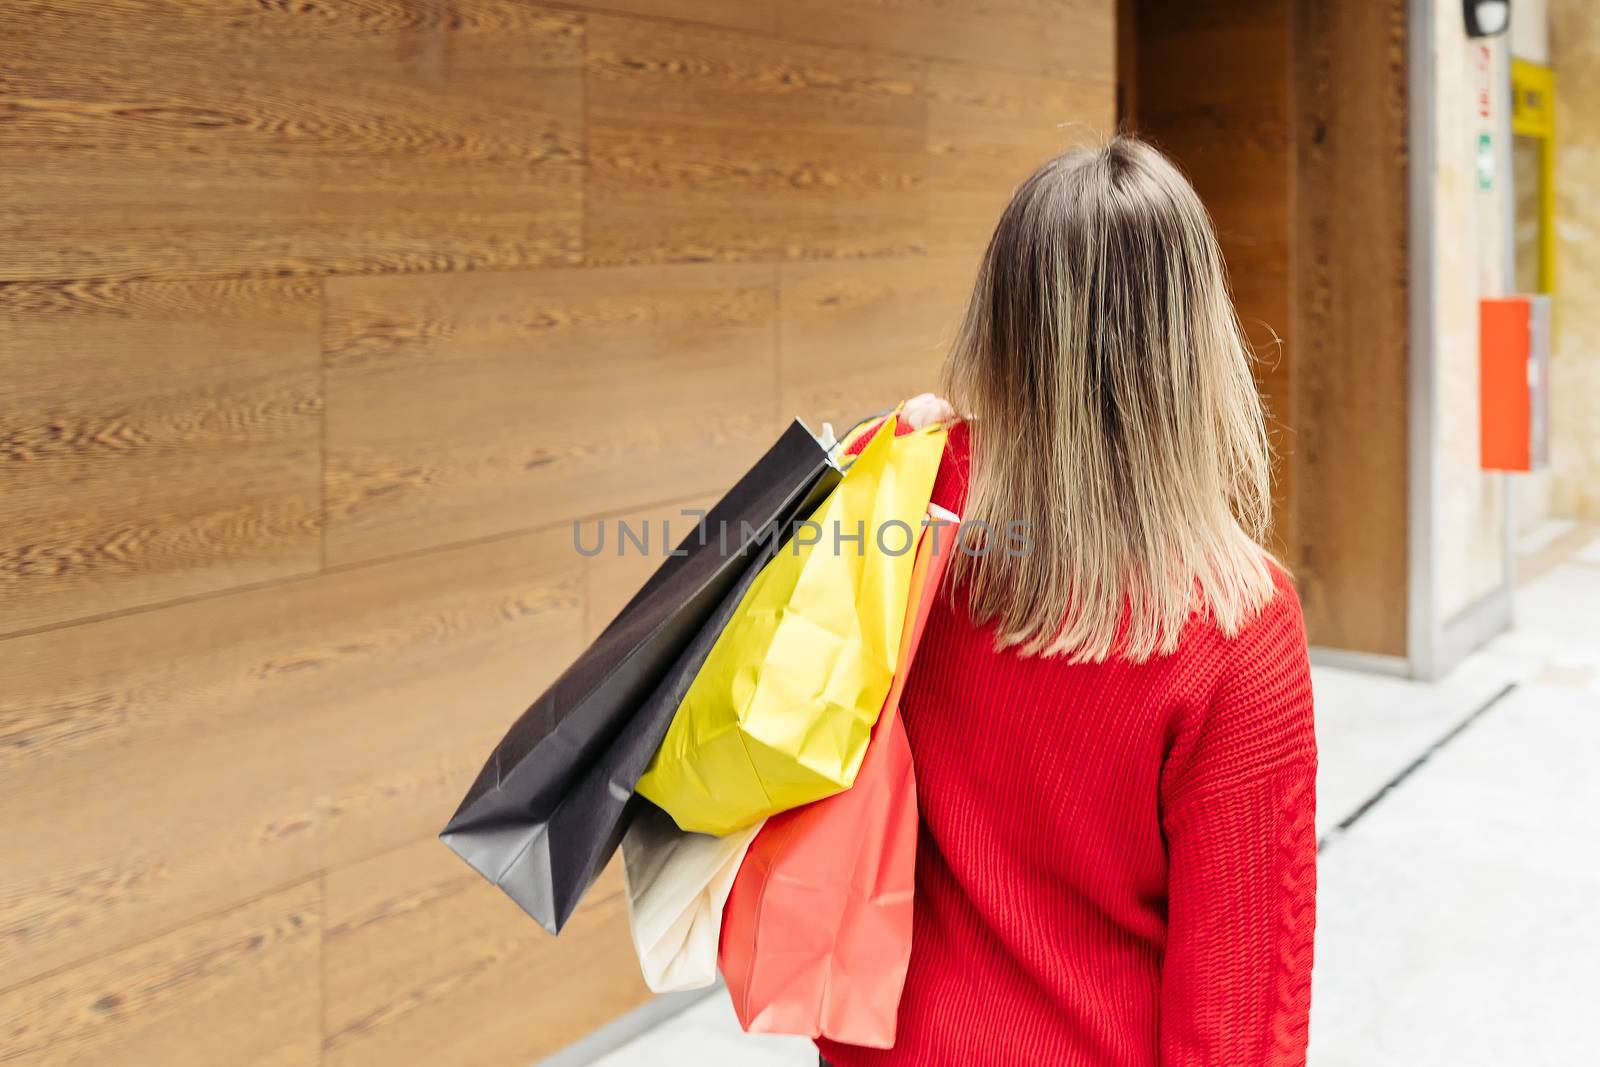 Adult woman walking through a mall with colorful shopping bags. Copy space.